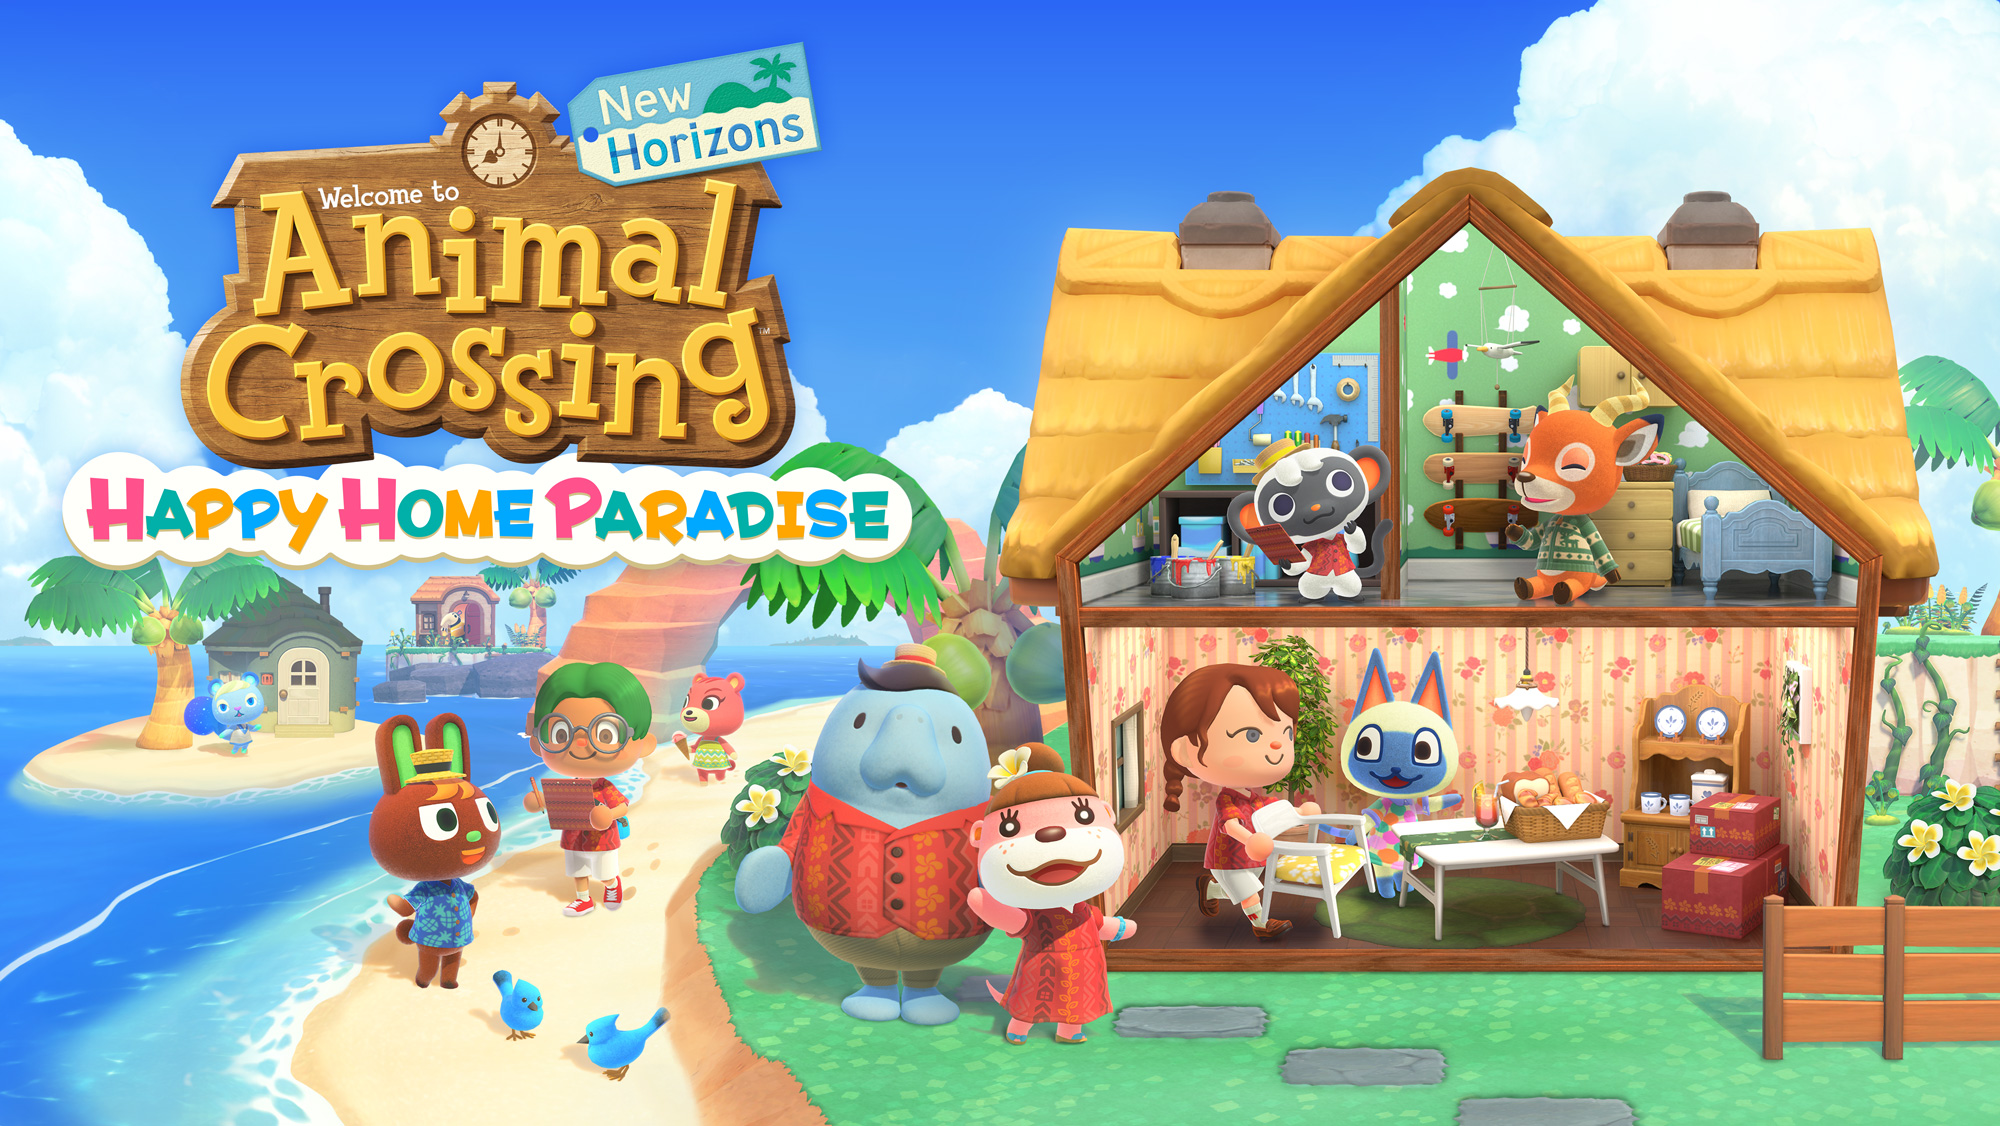 Promotional image for Animal Crossing;'s Happy Home Designer DLC paid update. A group of various anthropromophic characters stand in front of a furnished home near the side of the beach.